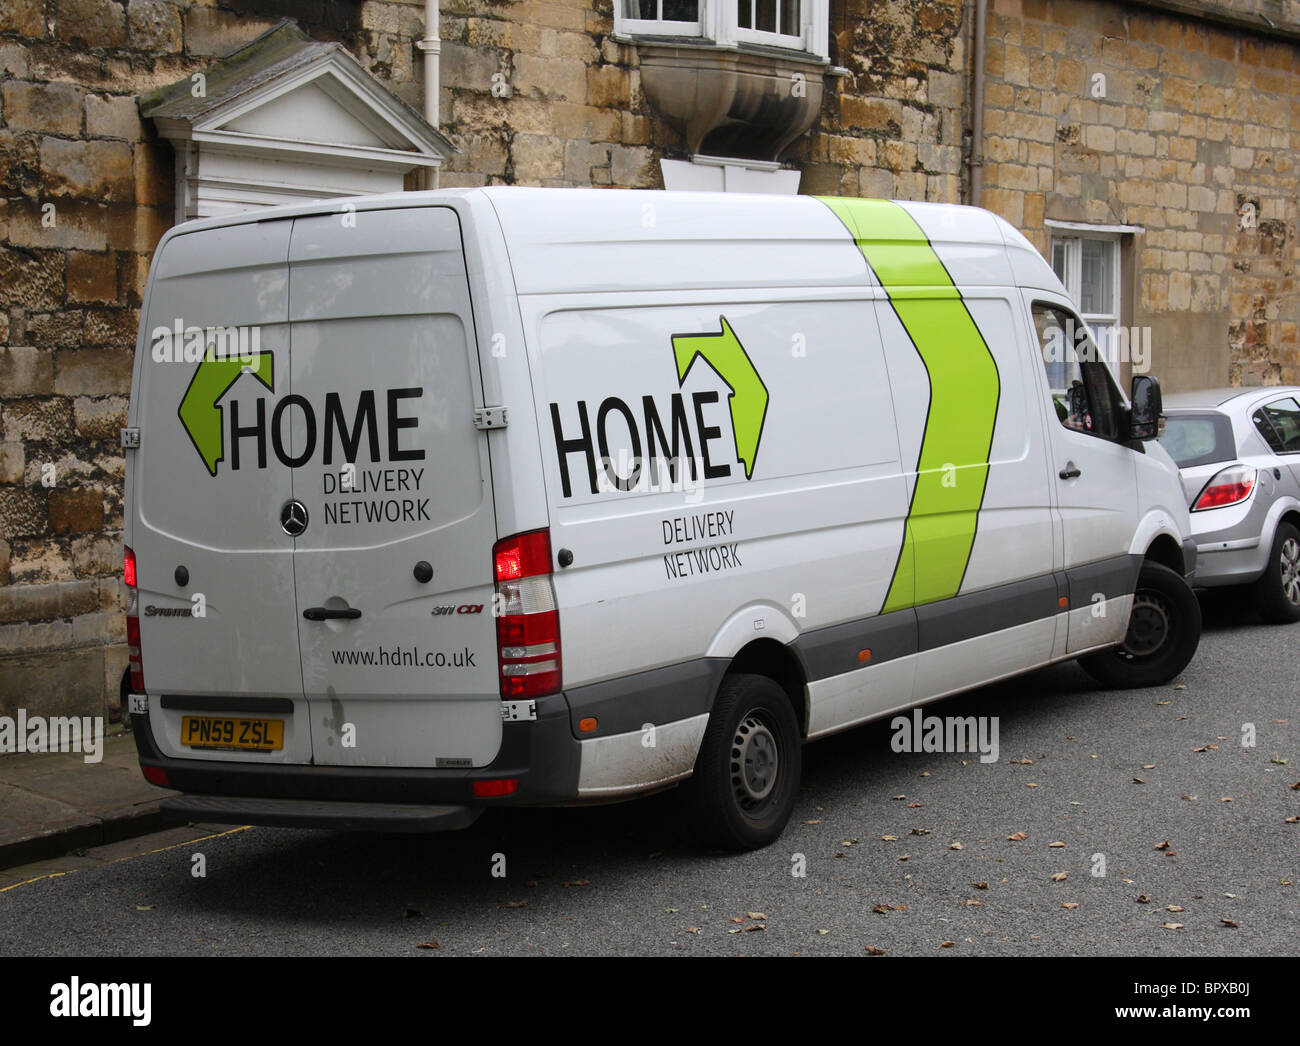 A Home Delivery Network van in a U.K. city. Stock Photo